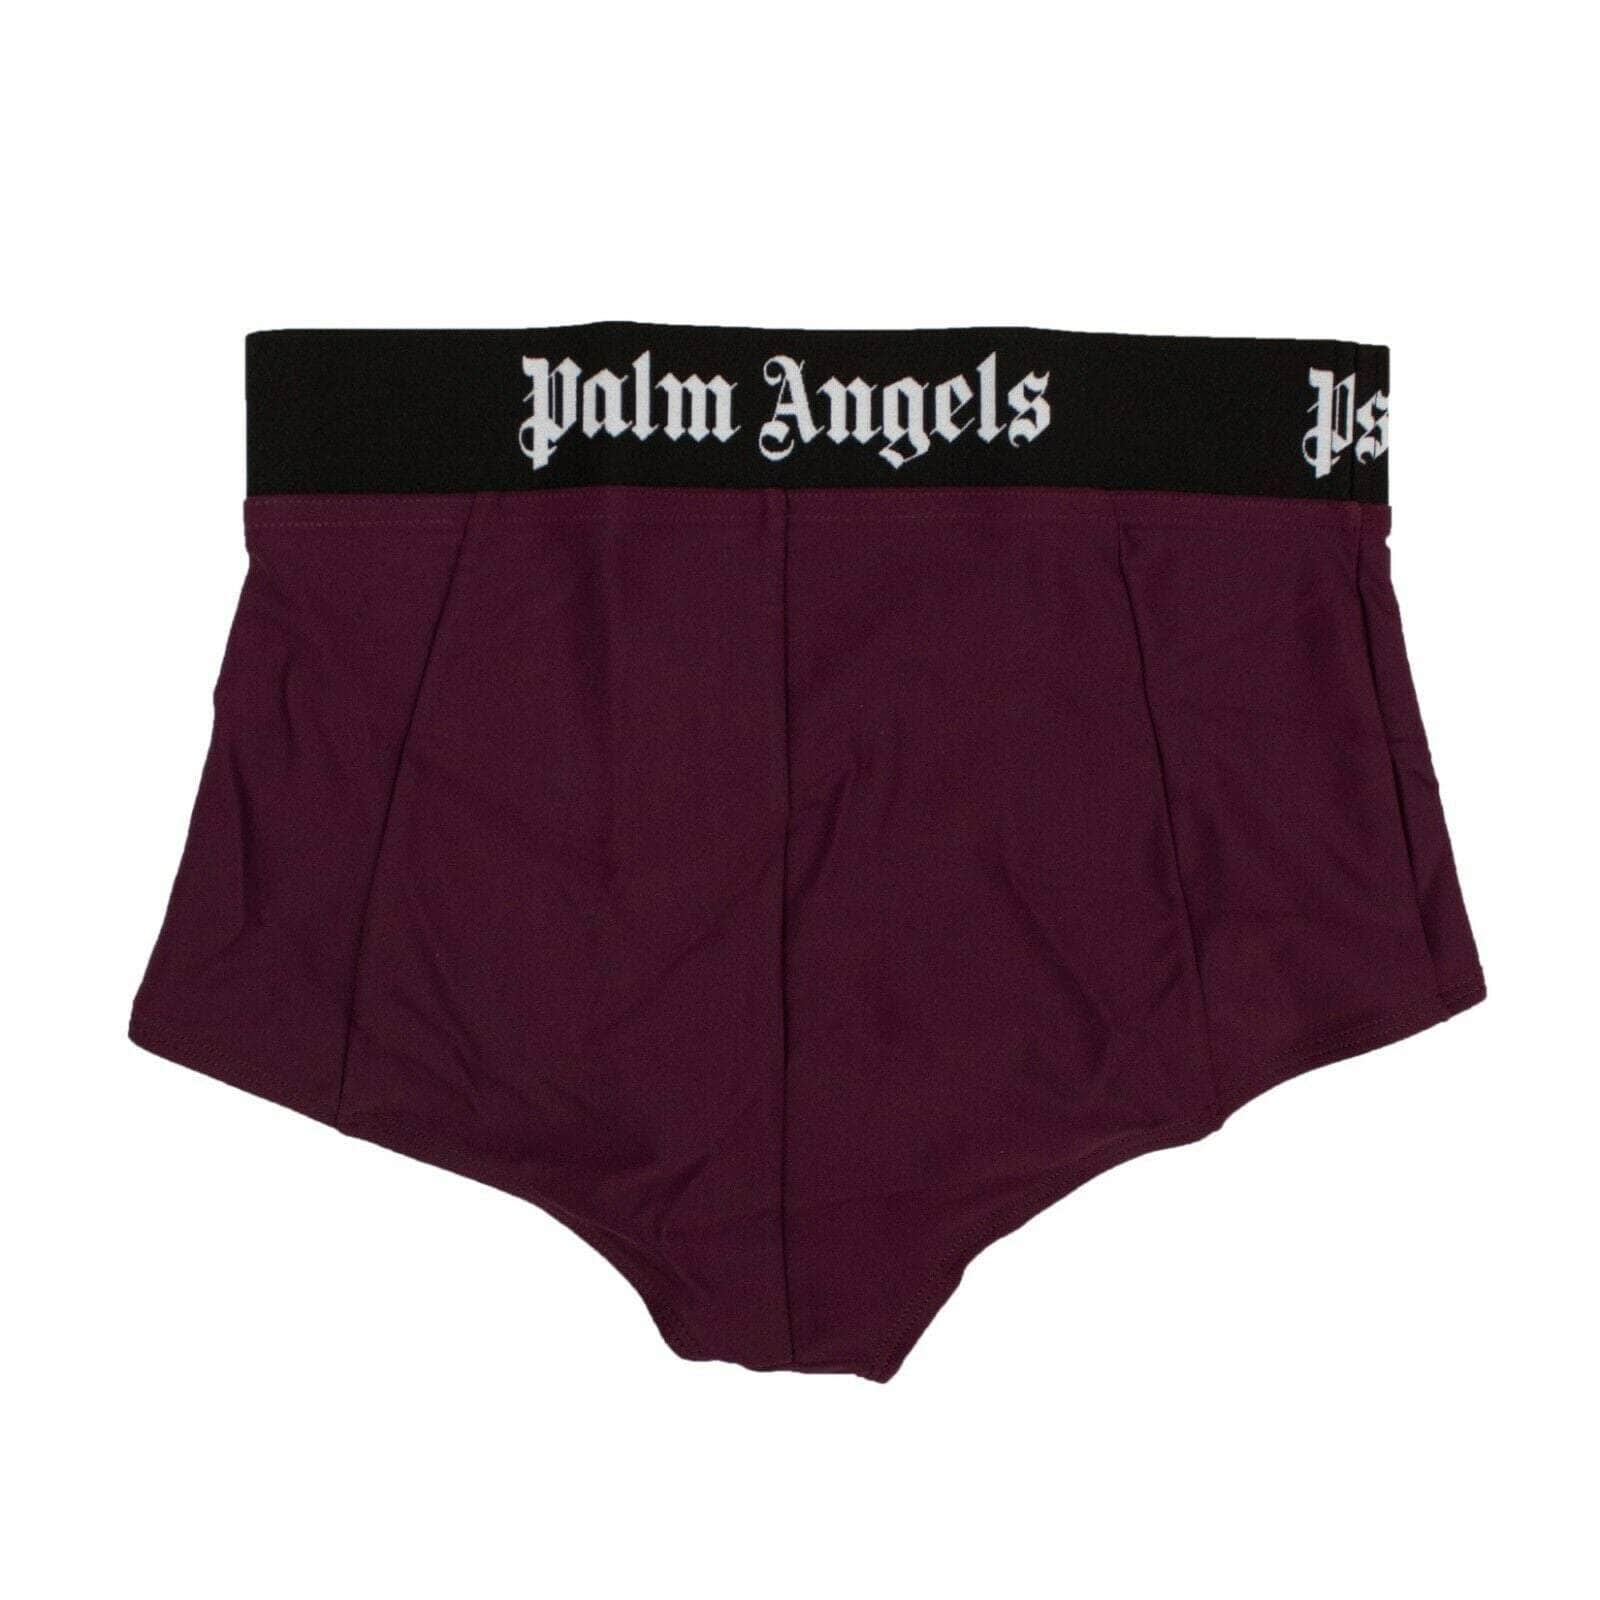 PALM ANGELS couponcollection, gender-womens, main-accessories, palm-angels, size-l, size-m, size-s, size-xs, under-250 Purple Logo Waistband Breifs